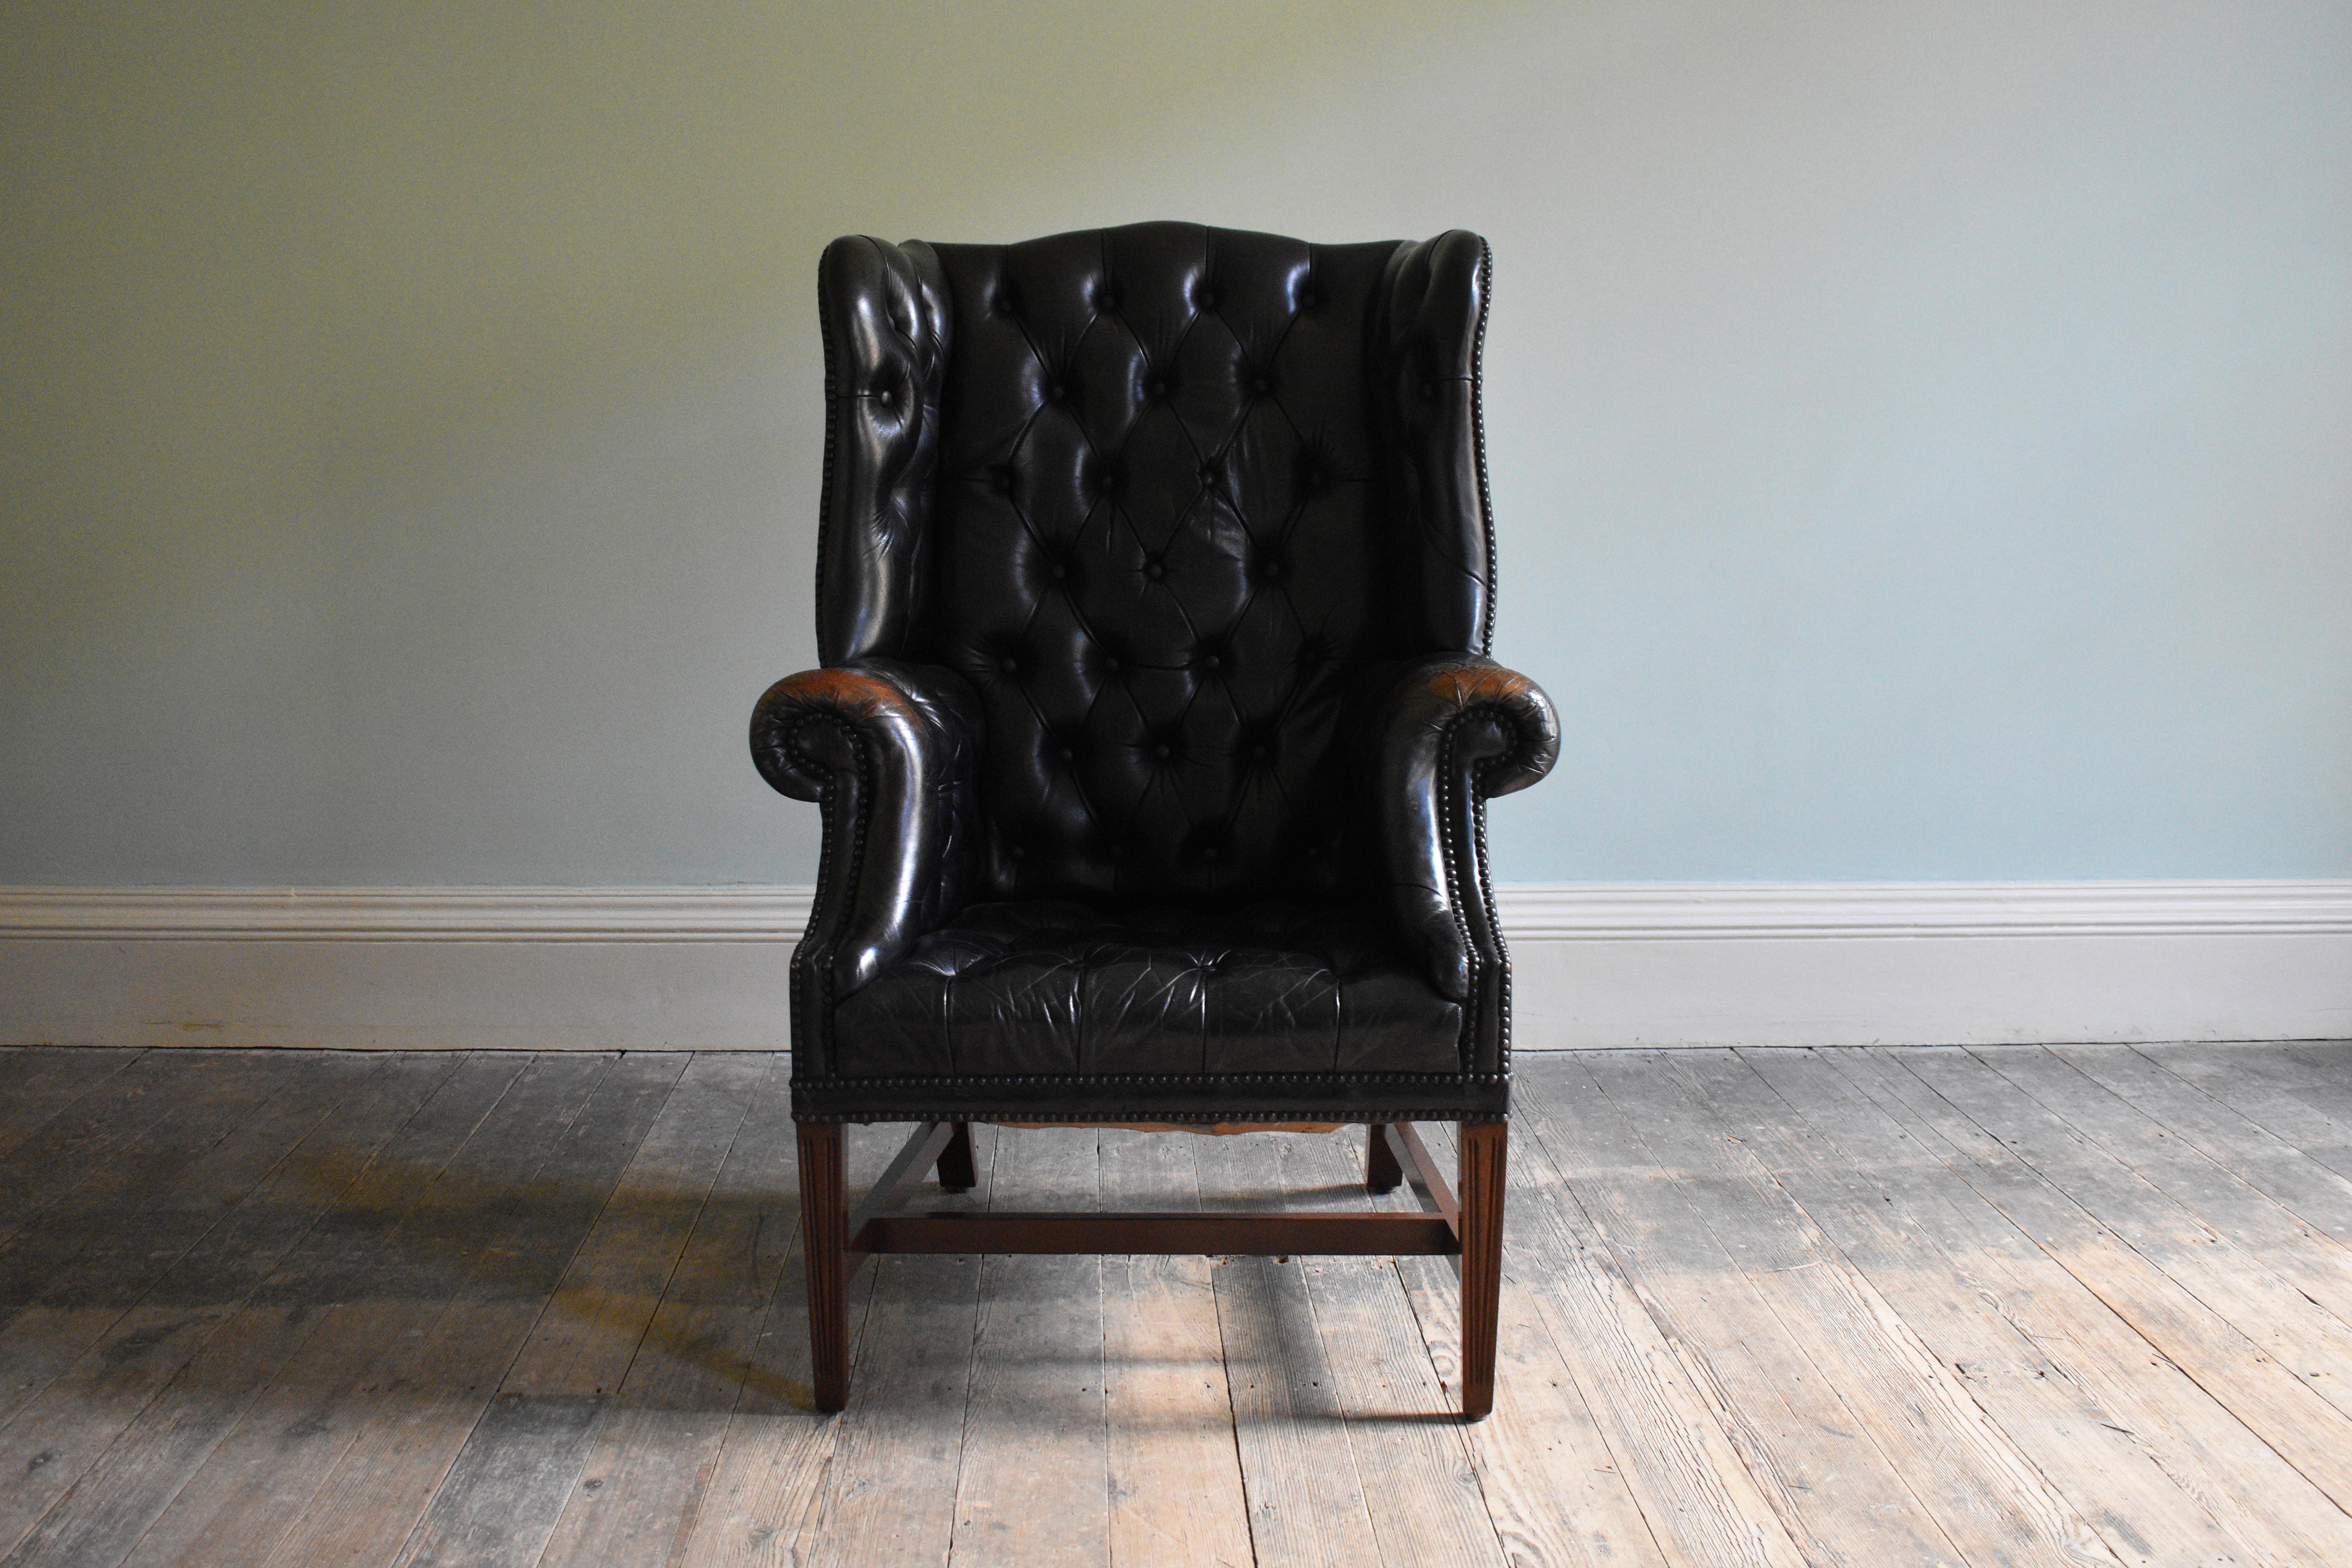 Georgian Black Leather-Upholstered Wingback Armchair

Leather, metal and wood. A fully restored Georgian black leather upholstered wingback armchair. The button upholstered back and slightly bowed seat is outlined with a close nail trim and raised